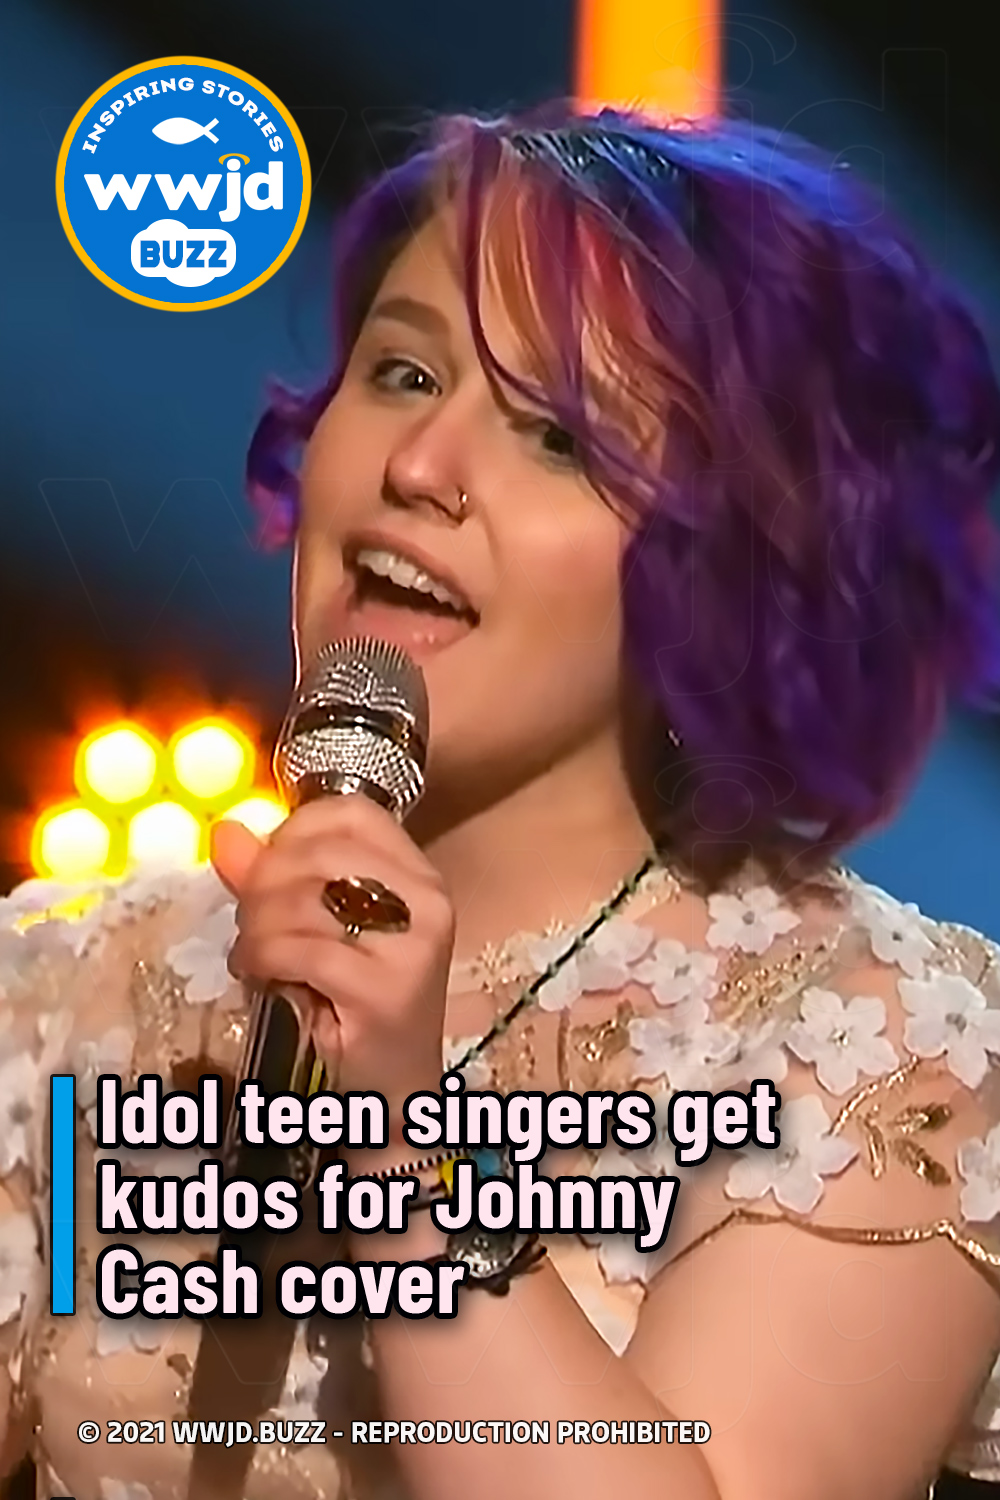 Idol teen singers get kudos for Johnny Cash cover